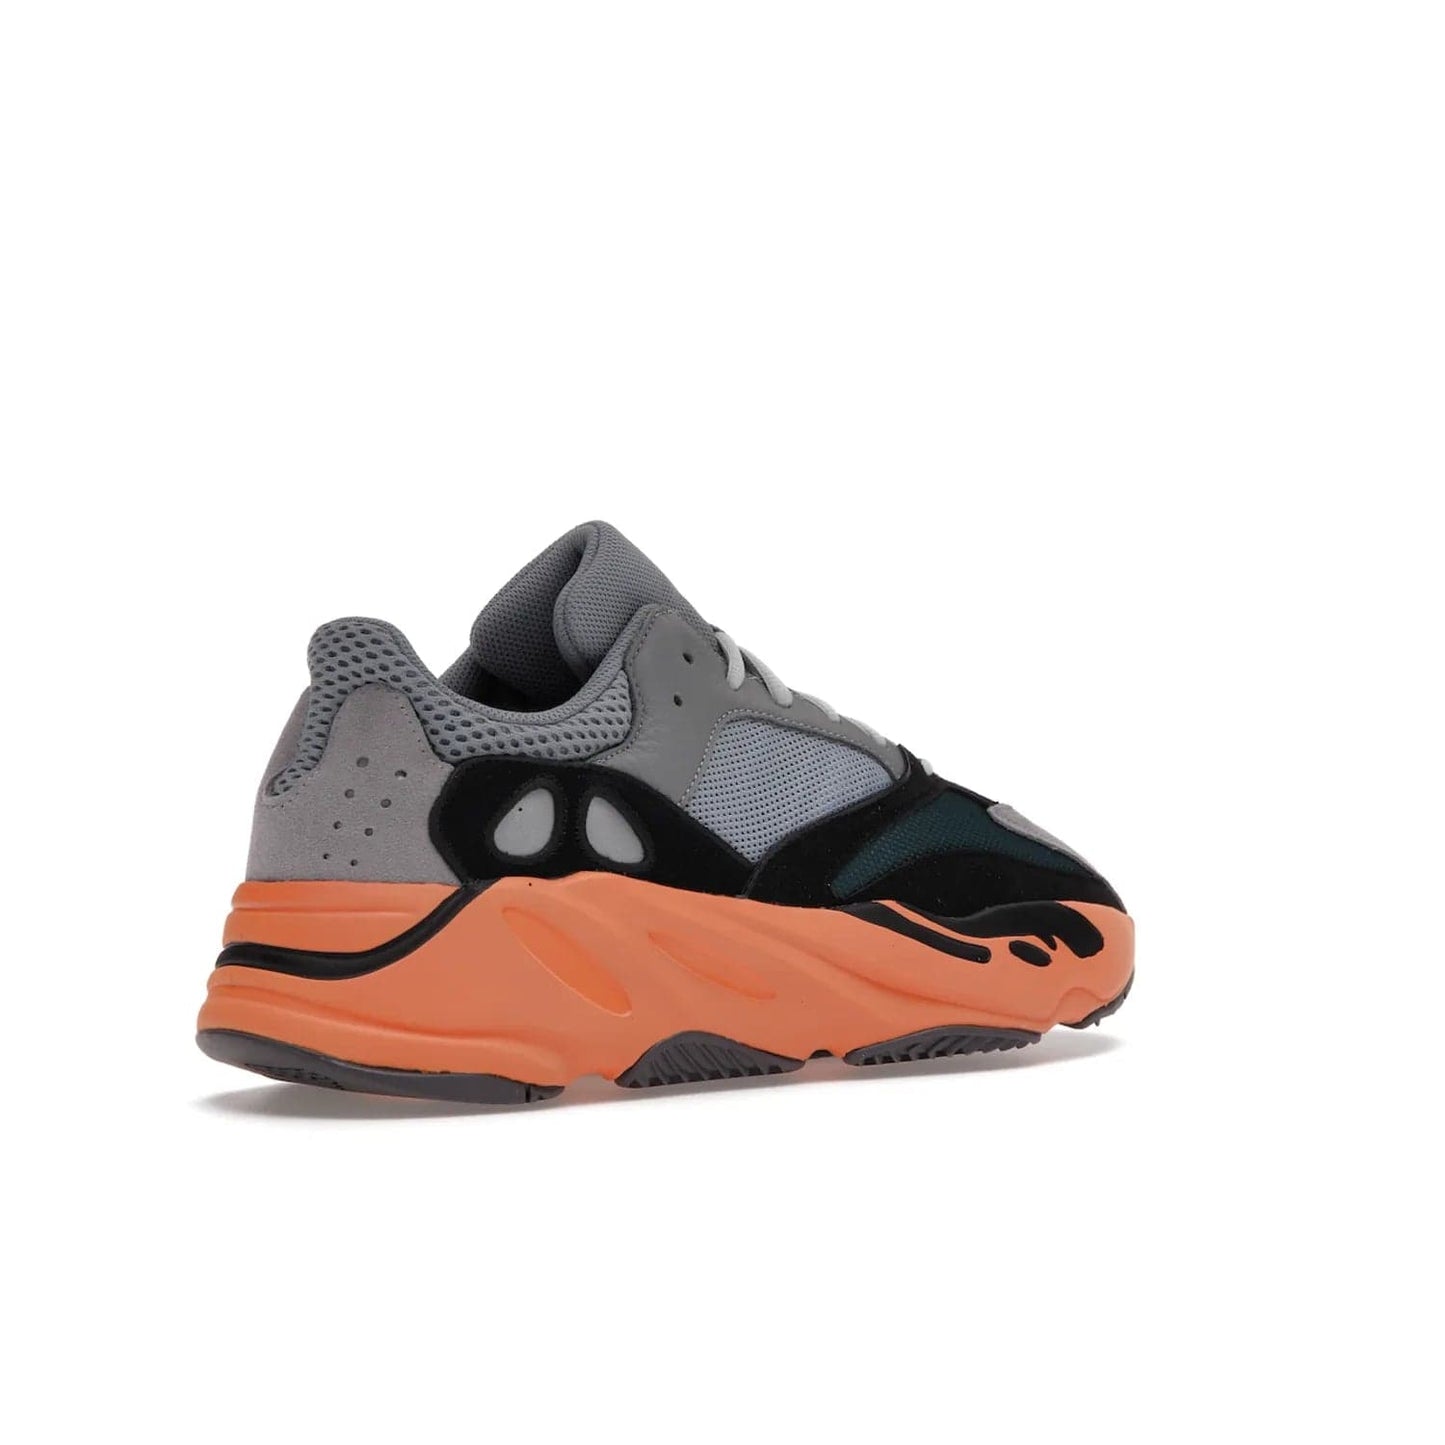 adidas Yeezy Boost 700 Wash Orange - Image 33 - Only at www.BallersClubKickz.com - Introducing the adidas Yeezy Boost 700 Wash Orange. Unique grey leather, suede, mesh upper and teal panels with a chunky Wash Orange Boost midsole. Release October 2021, make a statement today!